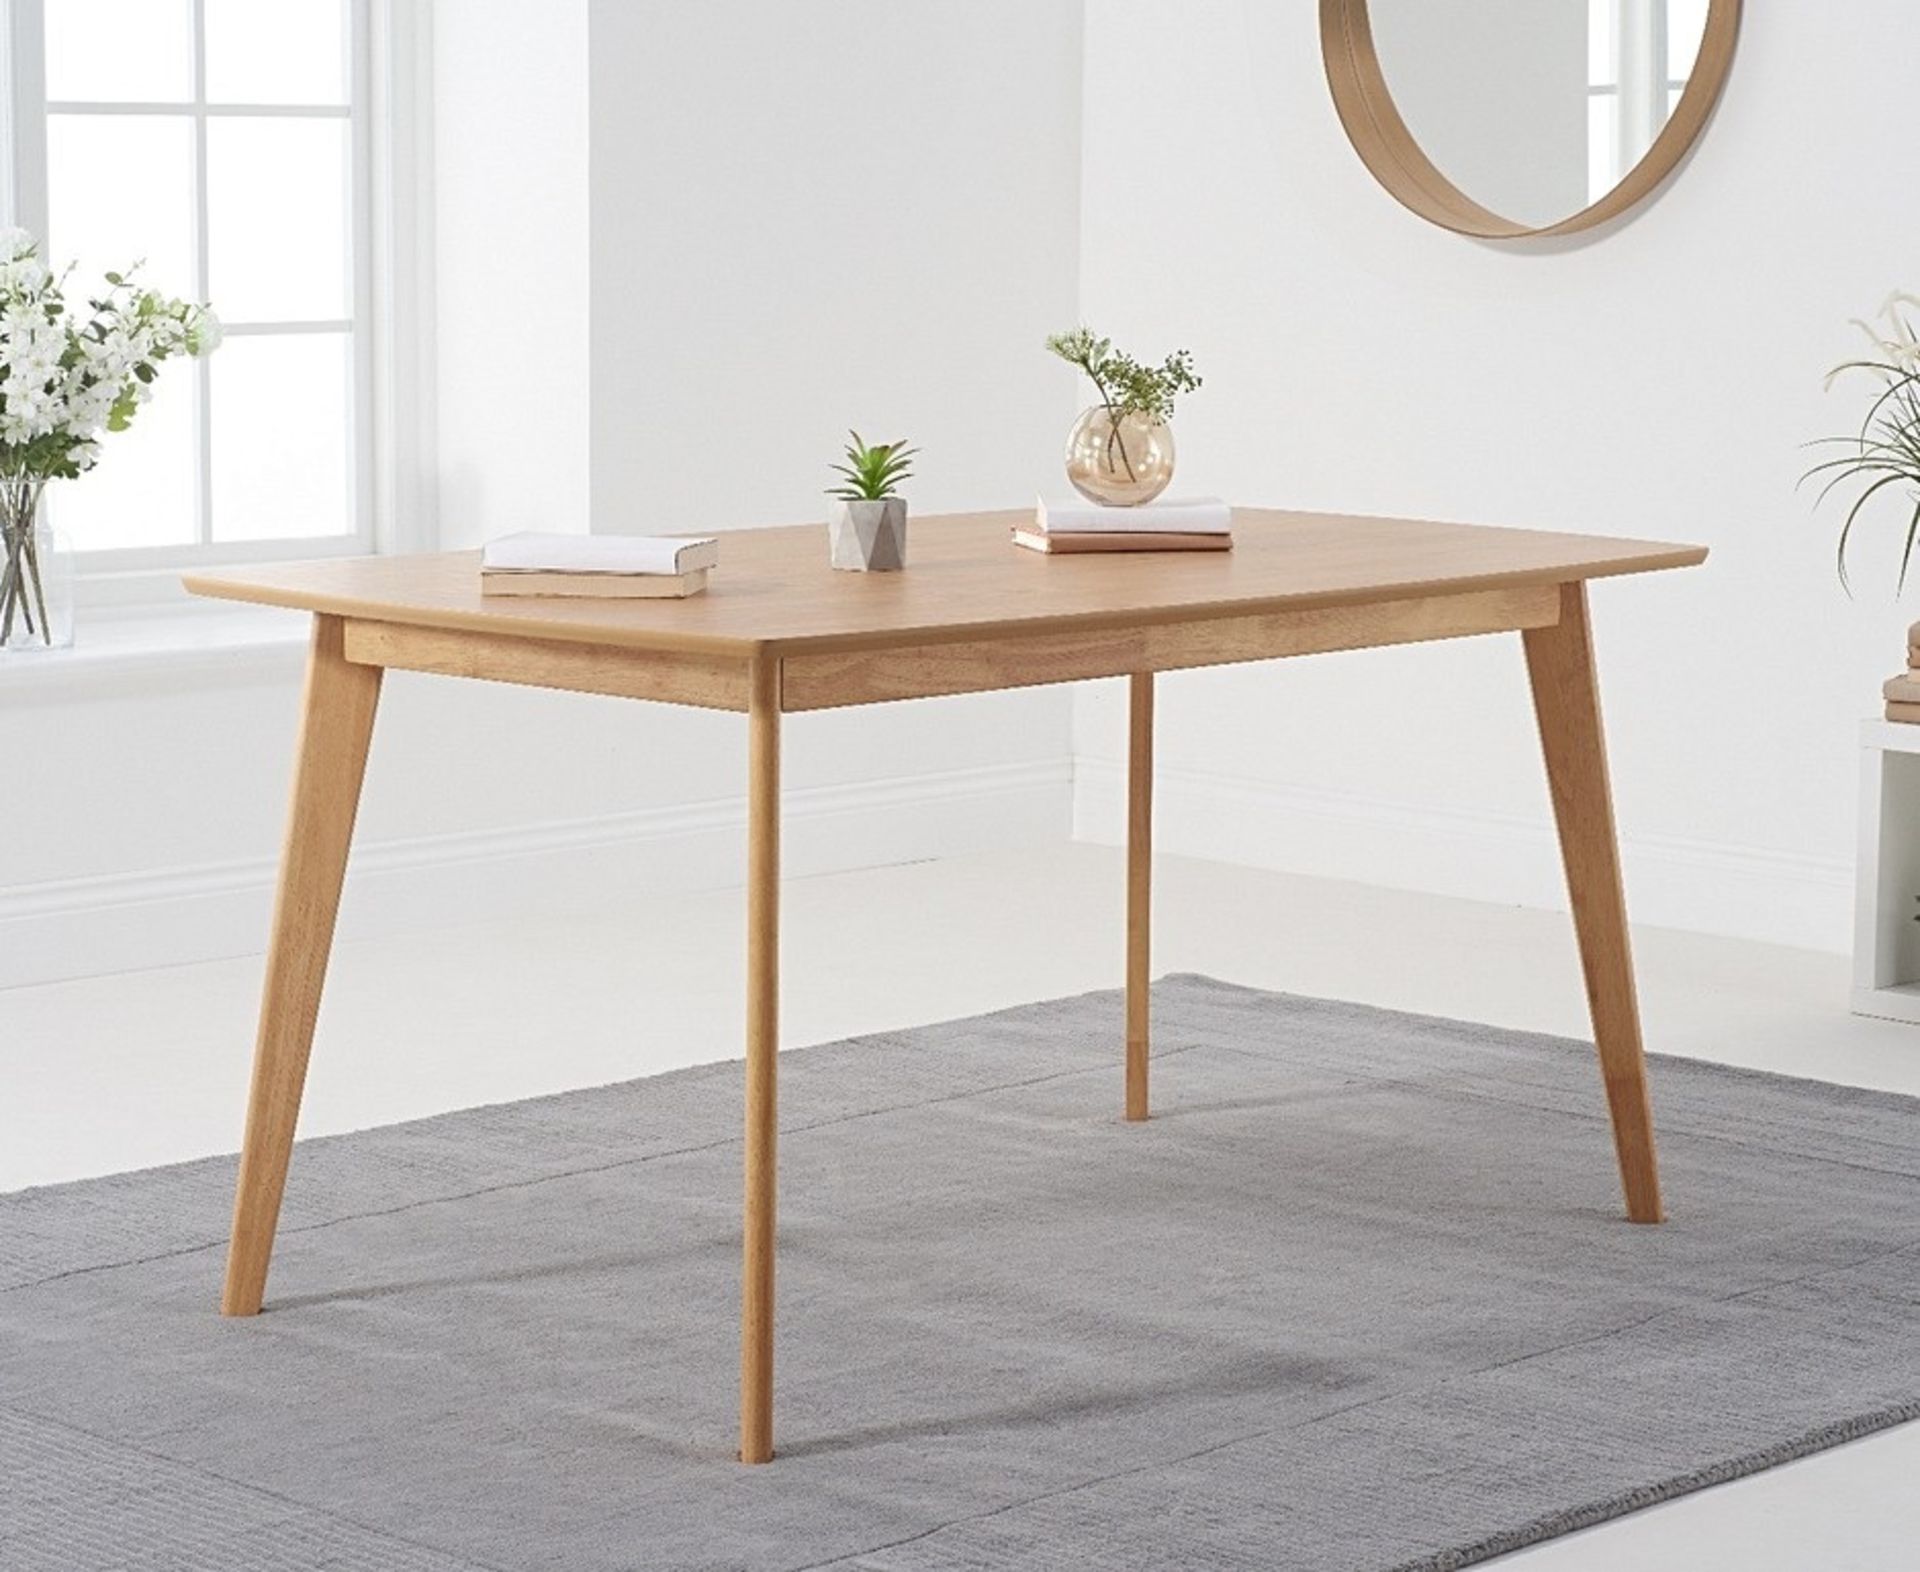 Sacha Oak 150cm Dining TableSacha Collection The Sacha collection combines contemporary lines and